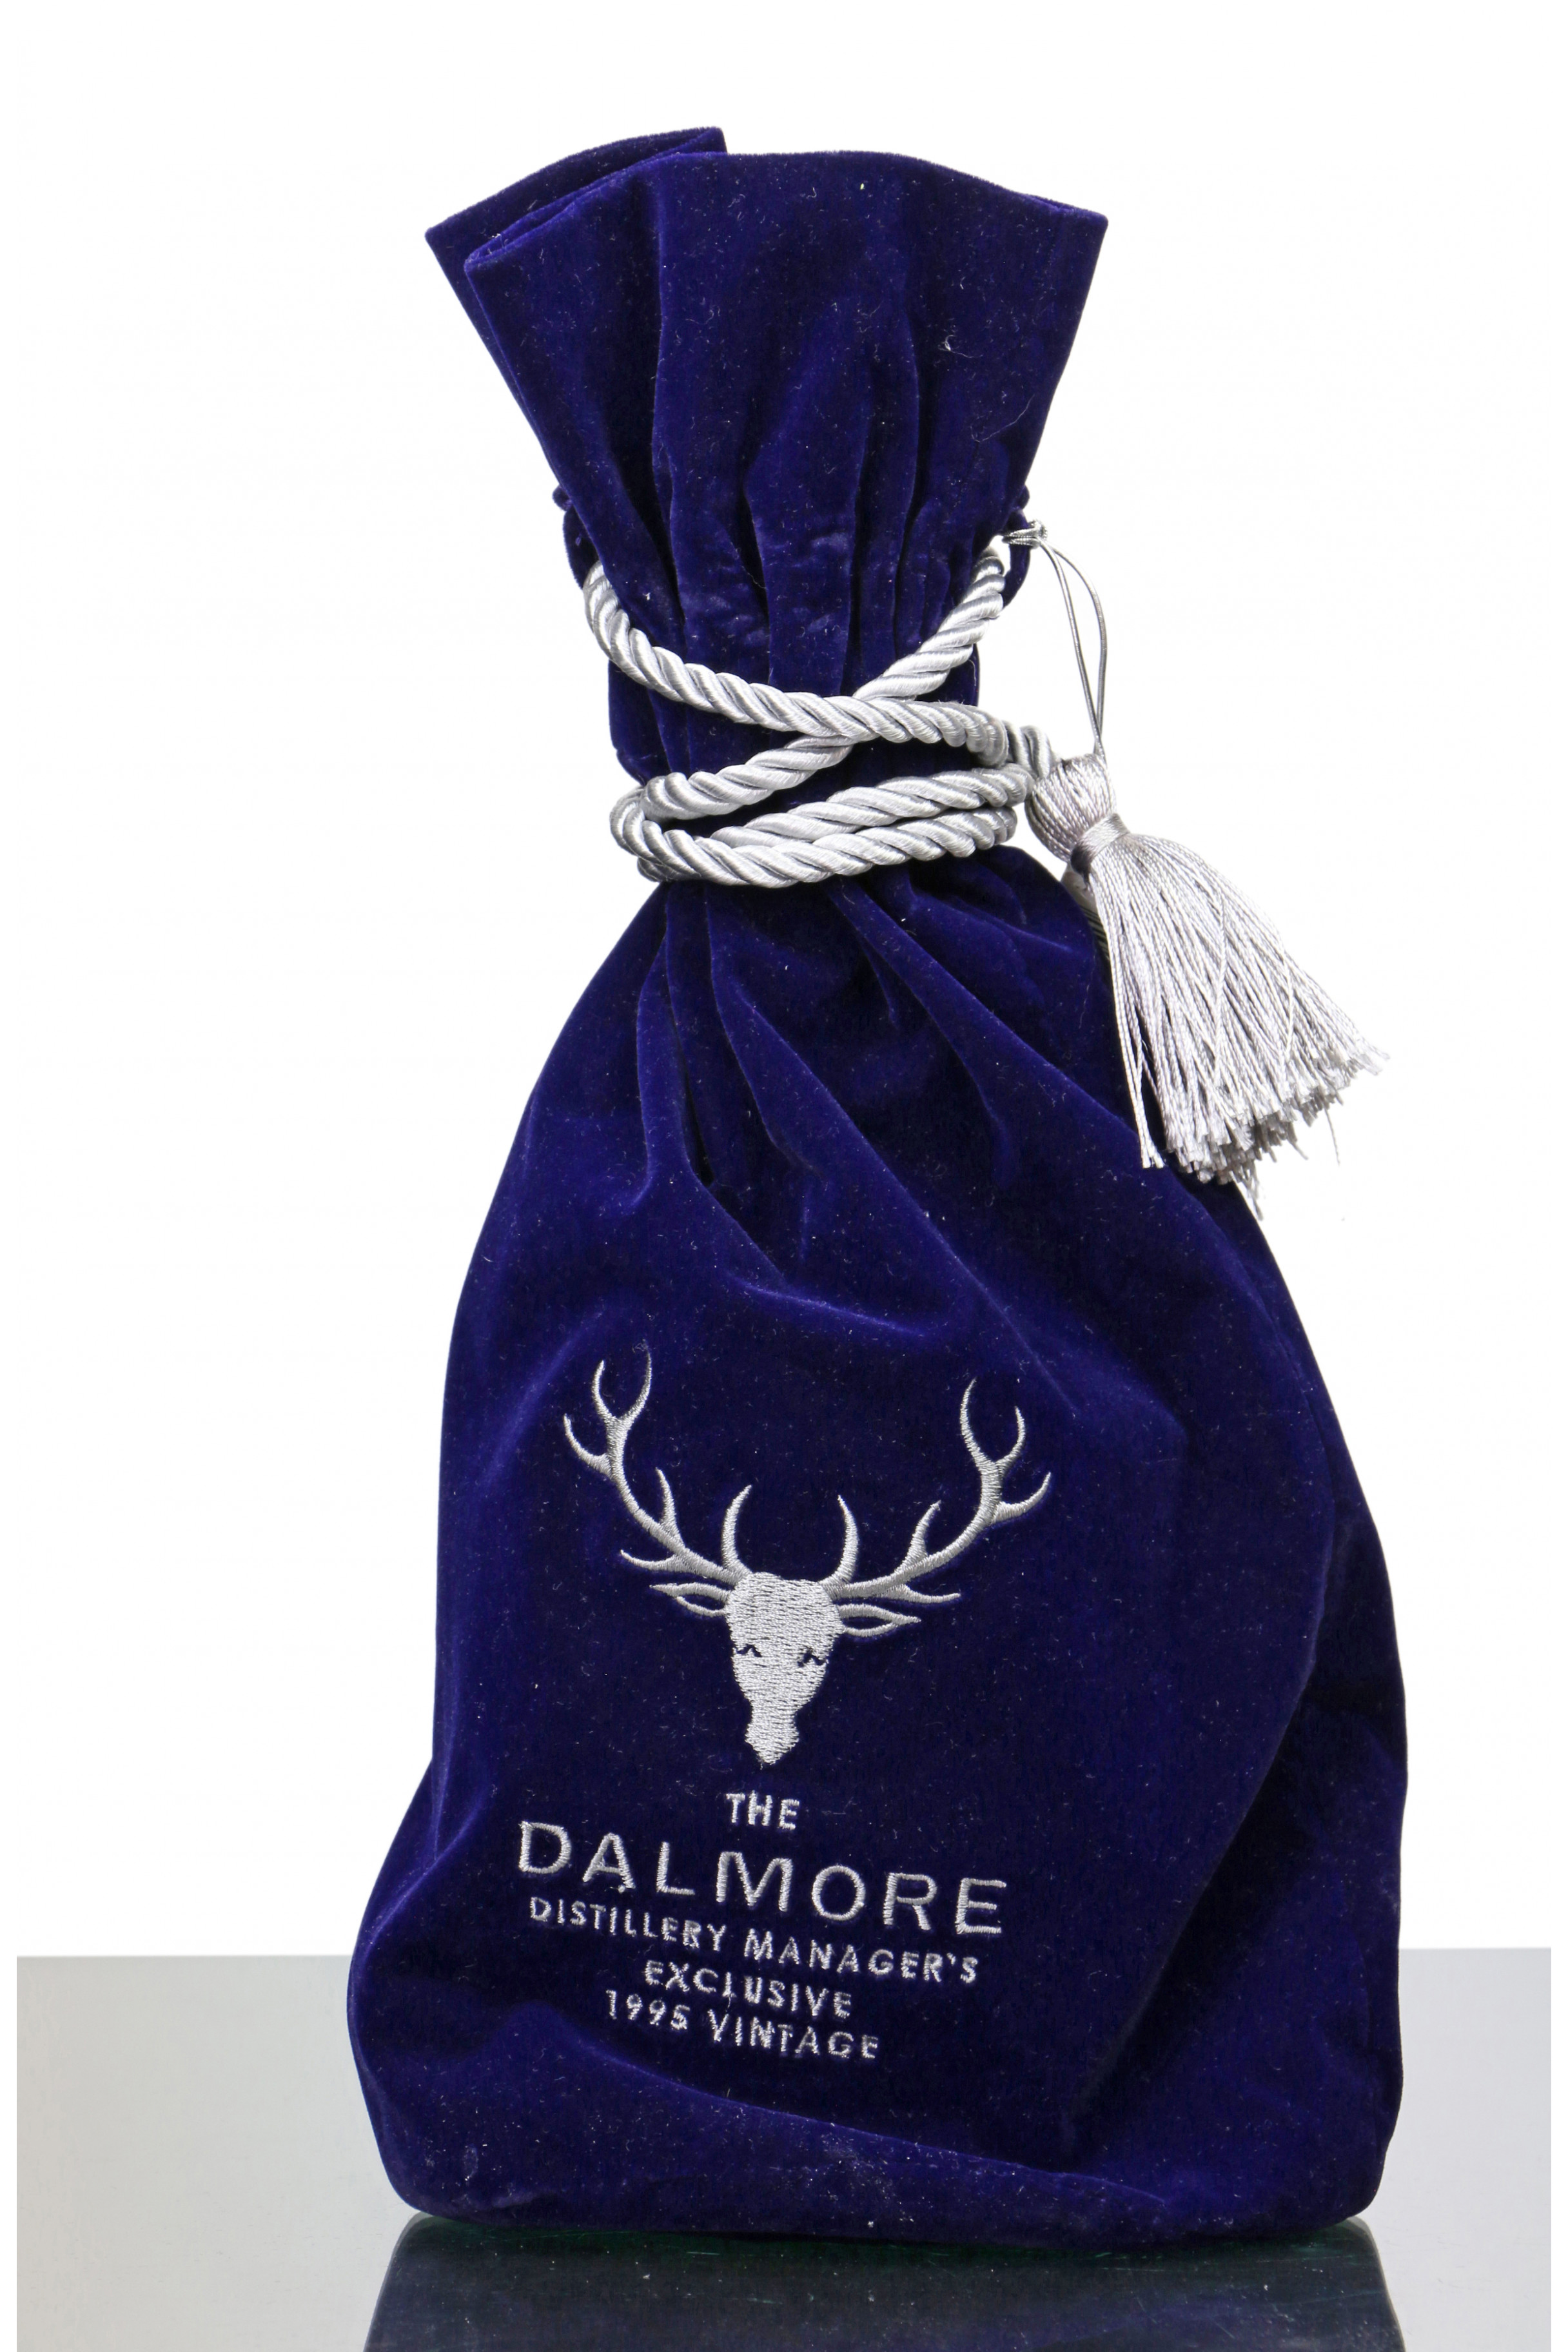 Dalmore 1995 Vintage Distillery Manager S Exclusive Just Whisky Auctions